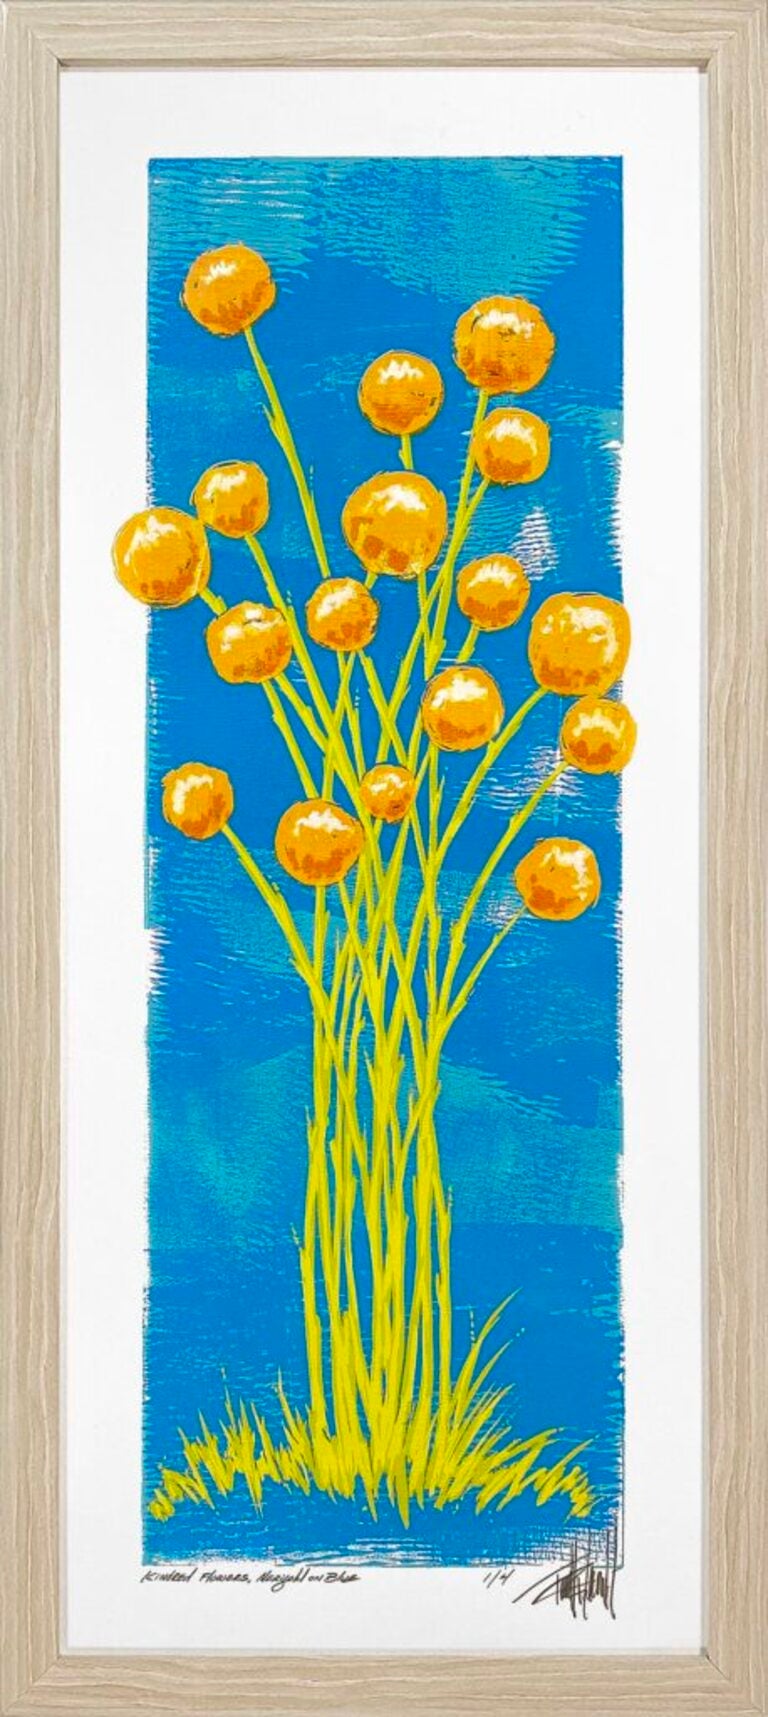 Terrell Thornhill  Landscape Print - Kindred Flowers, Marigold on Blue